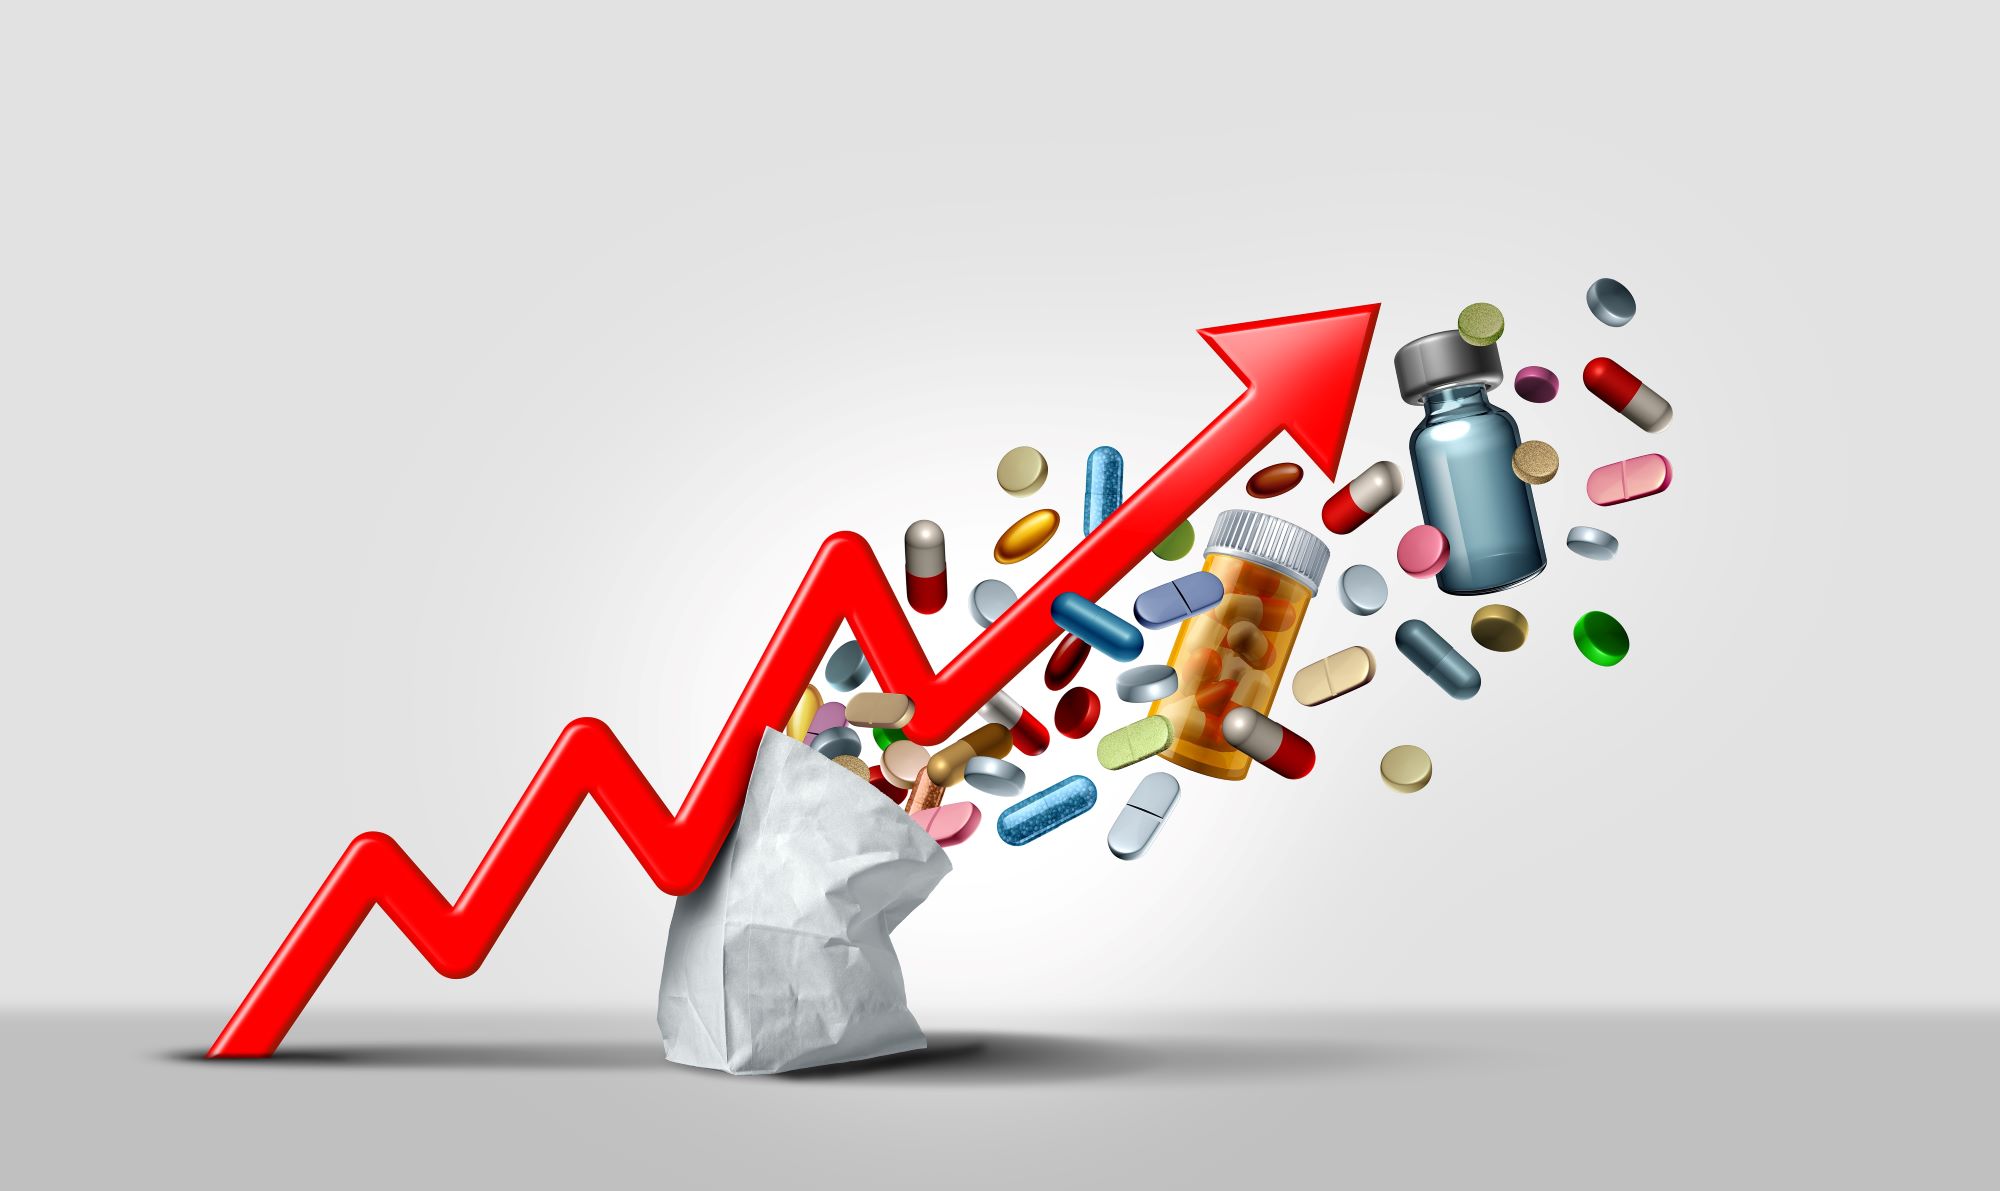 rising cost of pills illustration with a giant red line pointing upward ovver a bag of pills and other prescription drugs exploding